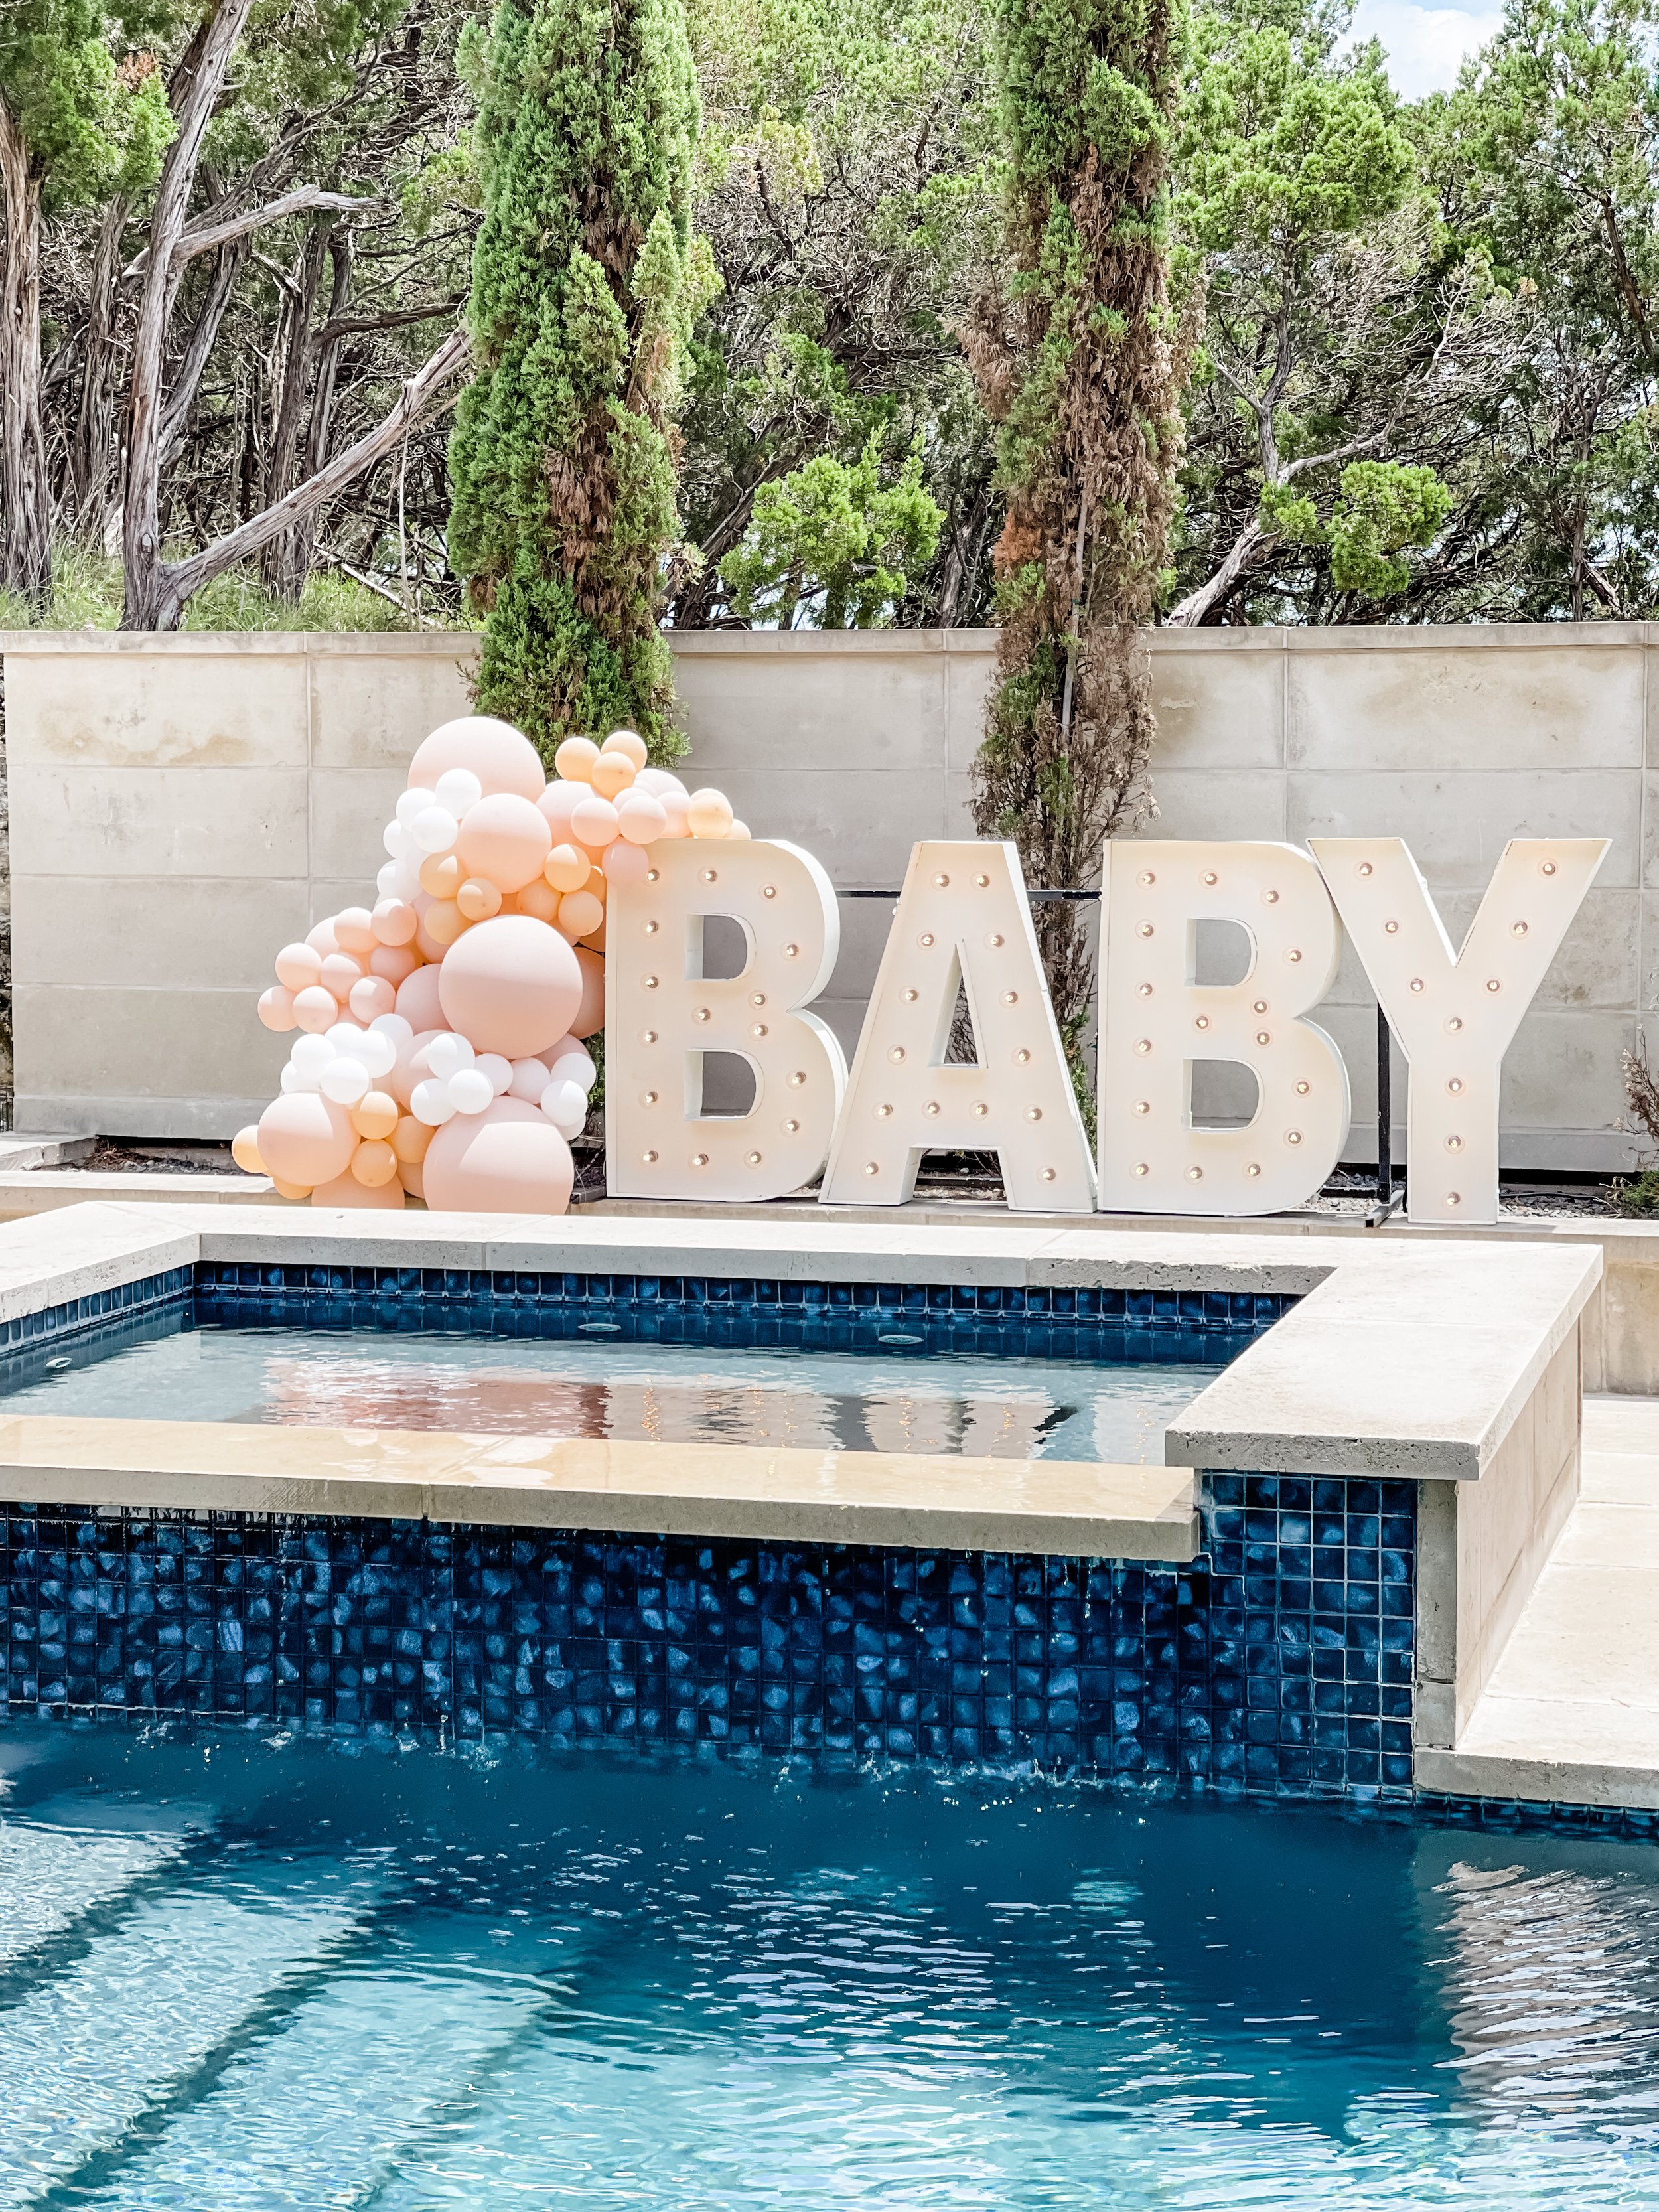  Marquee Baby Shower sign - Host a stylish and relaxed Tulum beach-inspired Baby Shower with these ideas for food bar, drink station, picnic style seating, decor and more from event designer Carolina of MINT Event Design in Austin, Texas. Get details